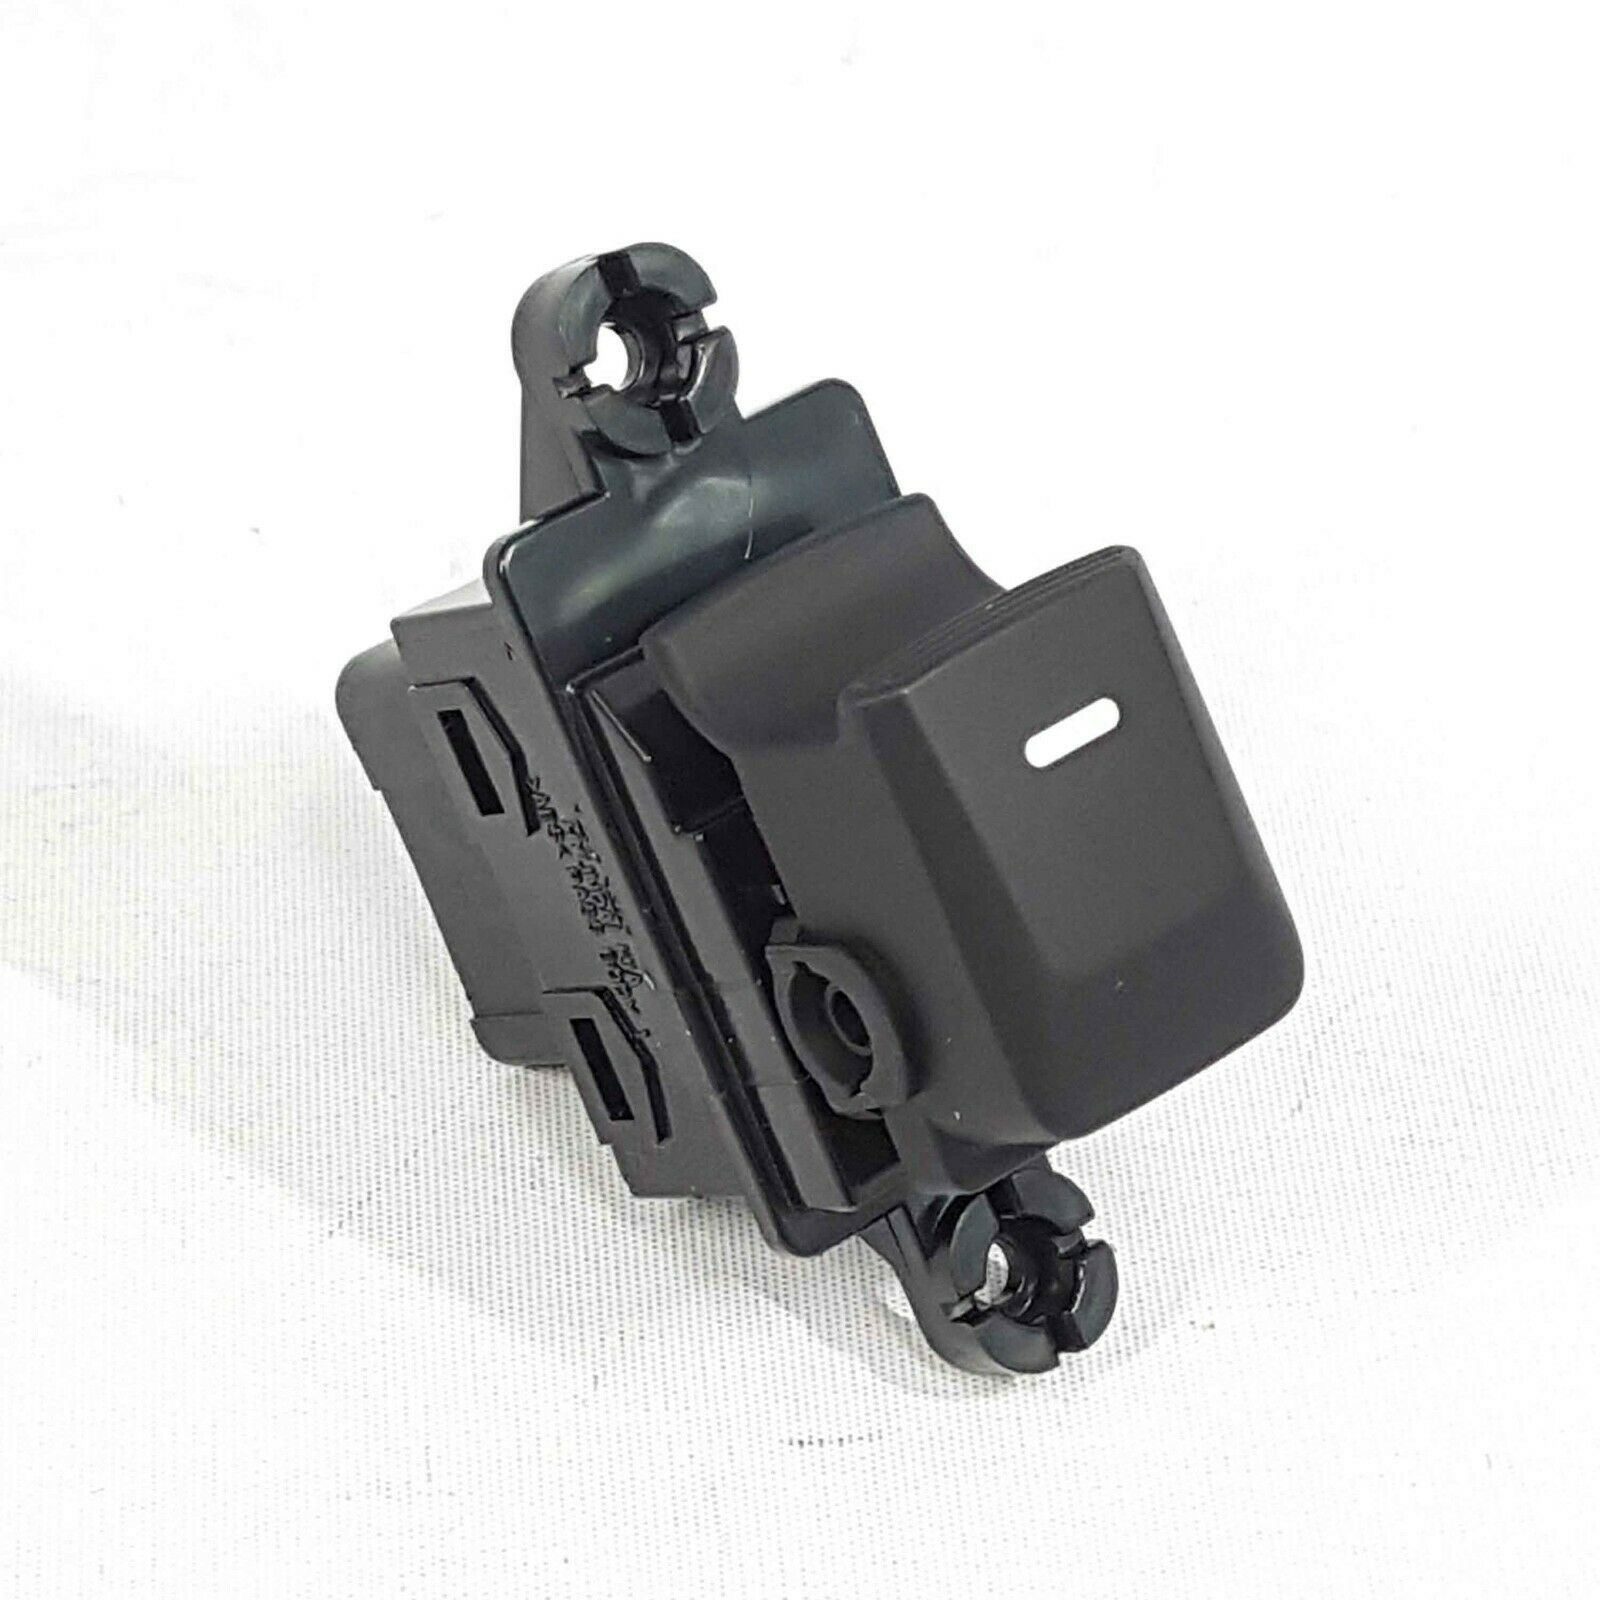 WGD Auto Parts New window control switch company for vehicle-2